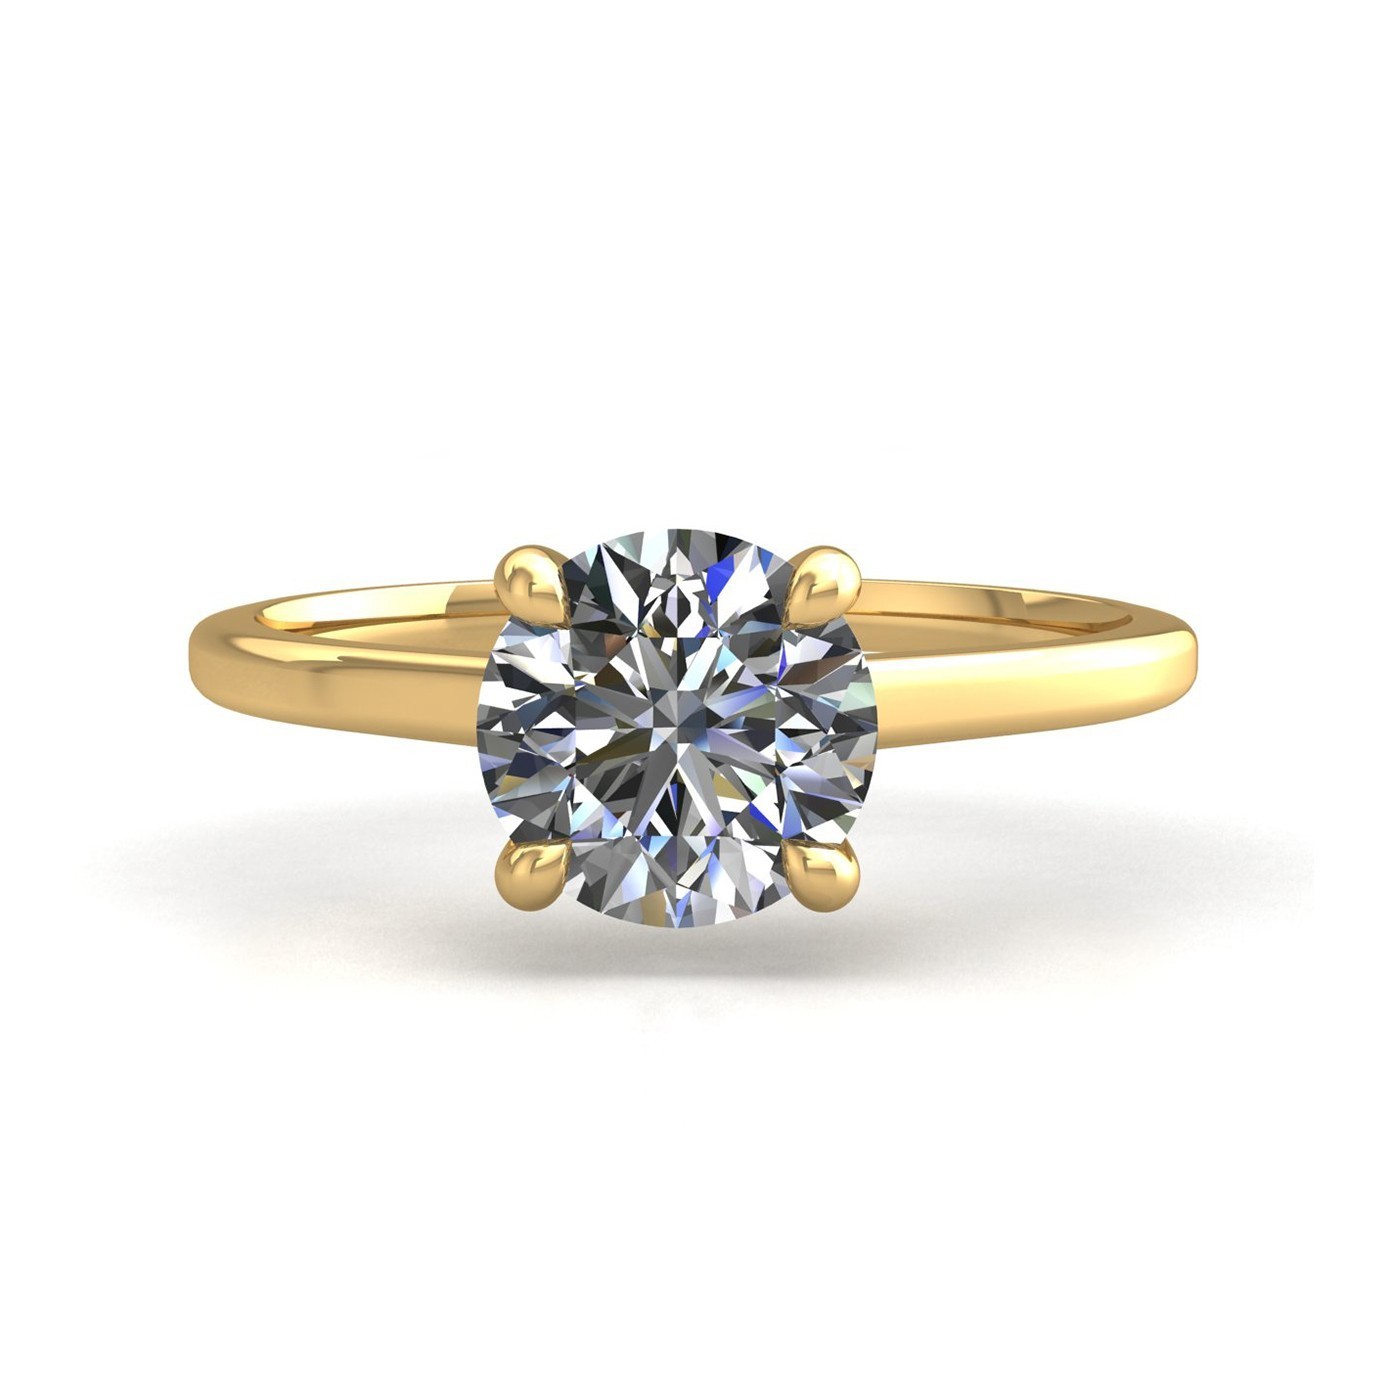 18k yellow gold  1.0ct 4 prongs solitaire round cut diamond engagement ring with whisper thin band